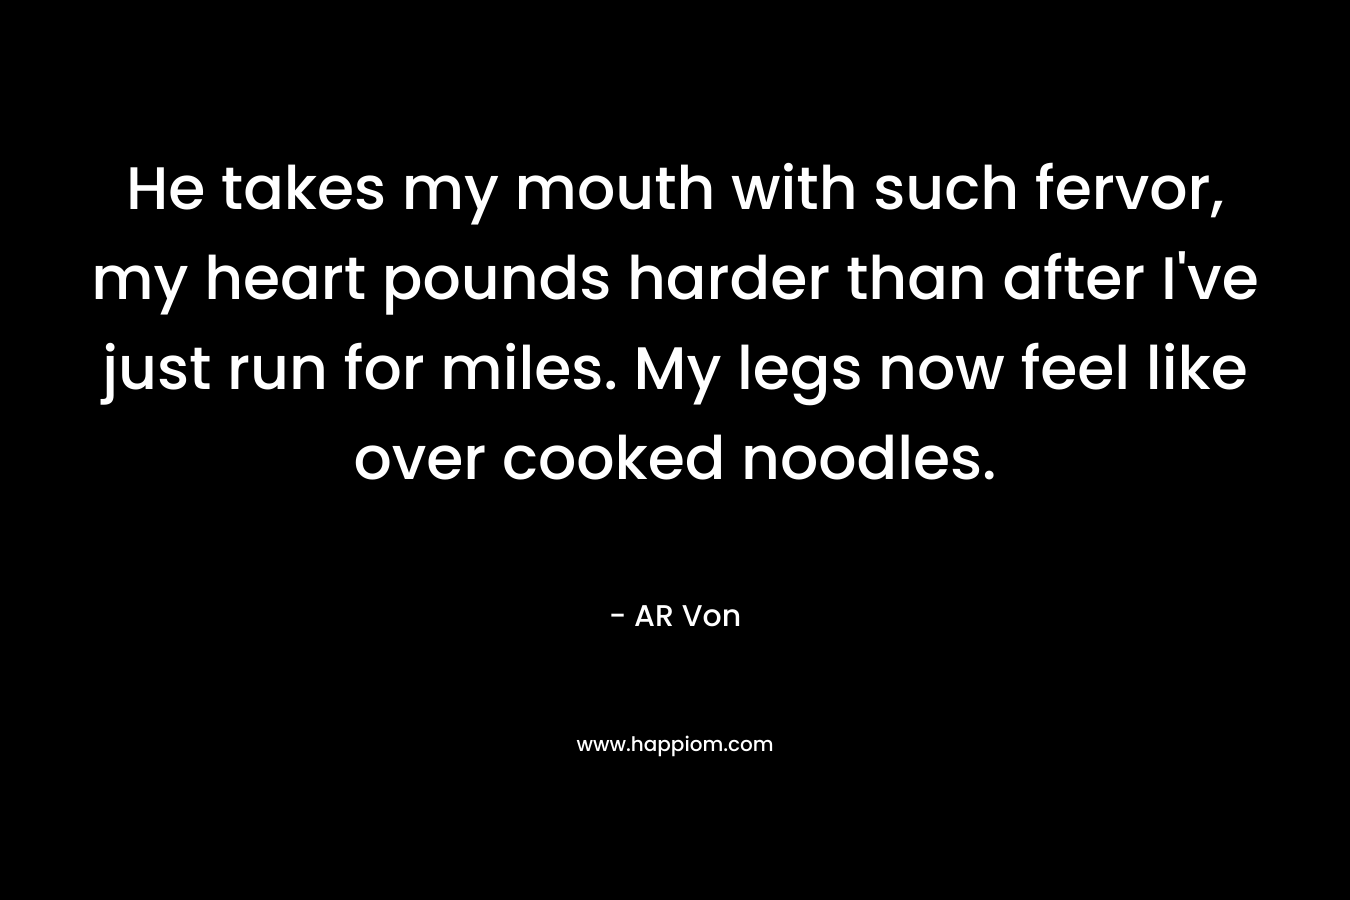 He takes my mouth with such fervor, my heart pounds harder than after I’ve just run for miles. My legs now feel like over cooked noodles. – AR Von